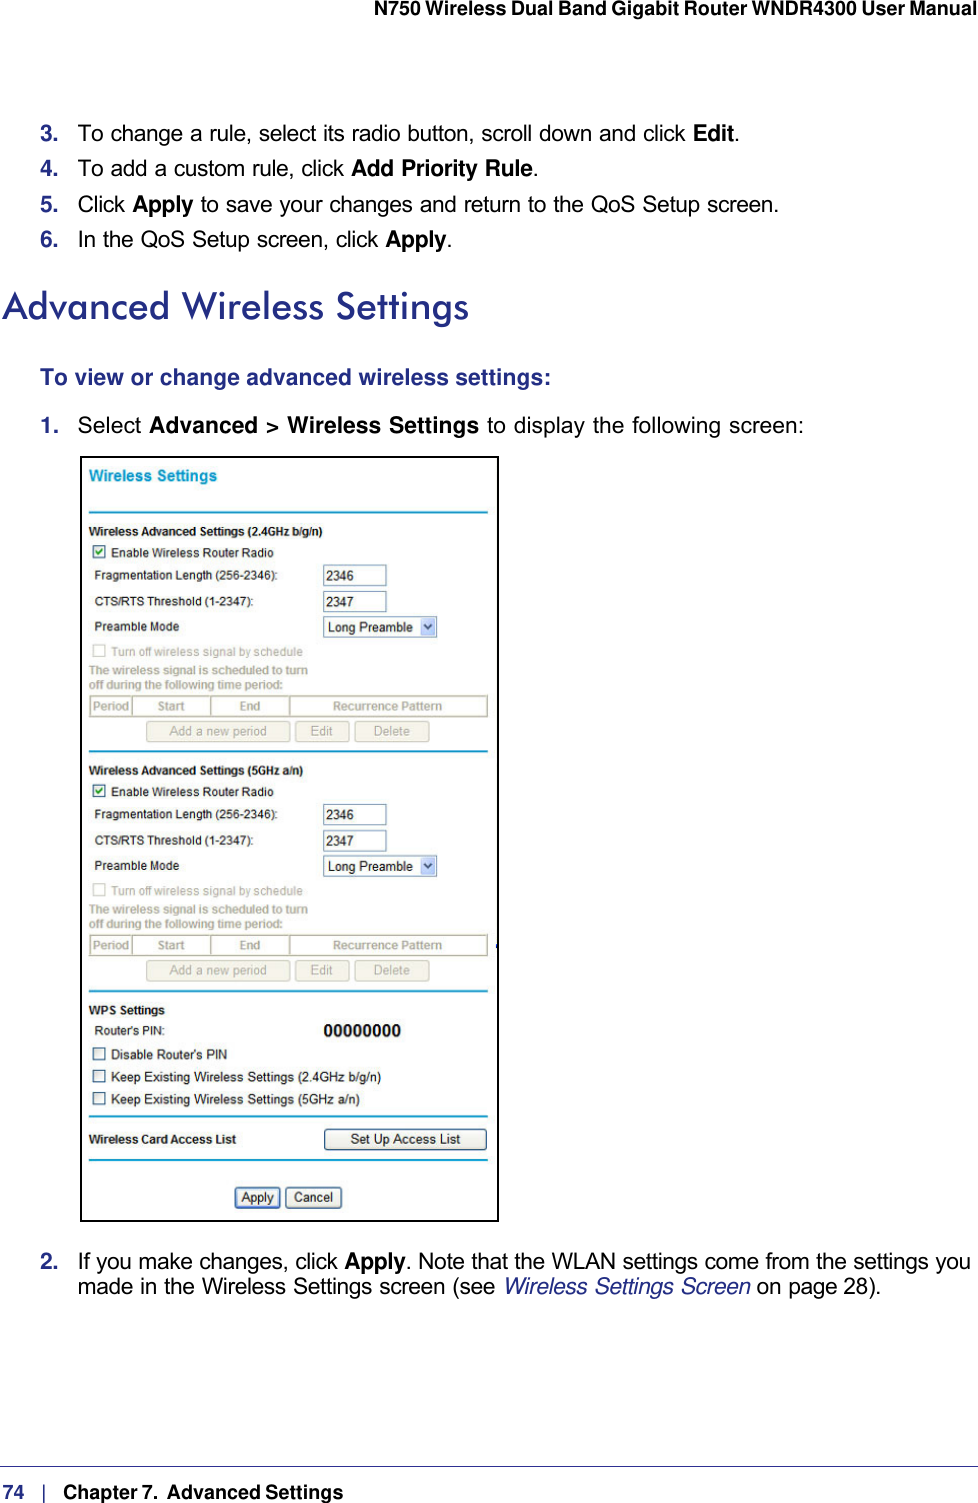 74   |   Chapter 7.  Advanced Settings  N750 Wireless Dual Band Gigabit Router WNDR4300 User Manual 3.  To change a rule, select its radio button, scroll down and click Edit.4.  To add a custom rule, click Add Priority Rule.5.  Click Apply to save your changes and return to the QoS Setup screen.6.  In the QoS Setup screen, click Apply.Advanced Wireless SettingsTo view or change advanced wireless settings:1.  Select Advanced &gt; Wireless Settings to display the following screen:2.  If you make changes, click Apply. Note that the WLAN settings come from the settings you made in the Wireless Settings screen (see Wireless Settings Screen on page 28).